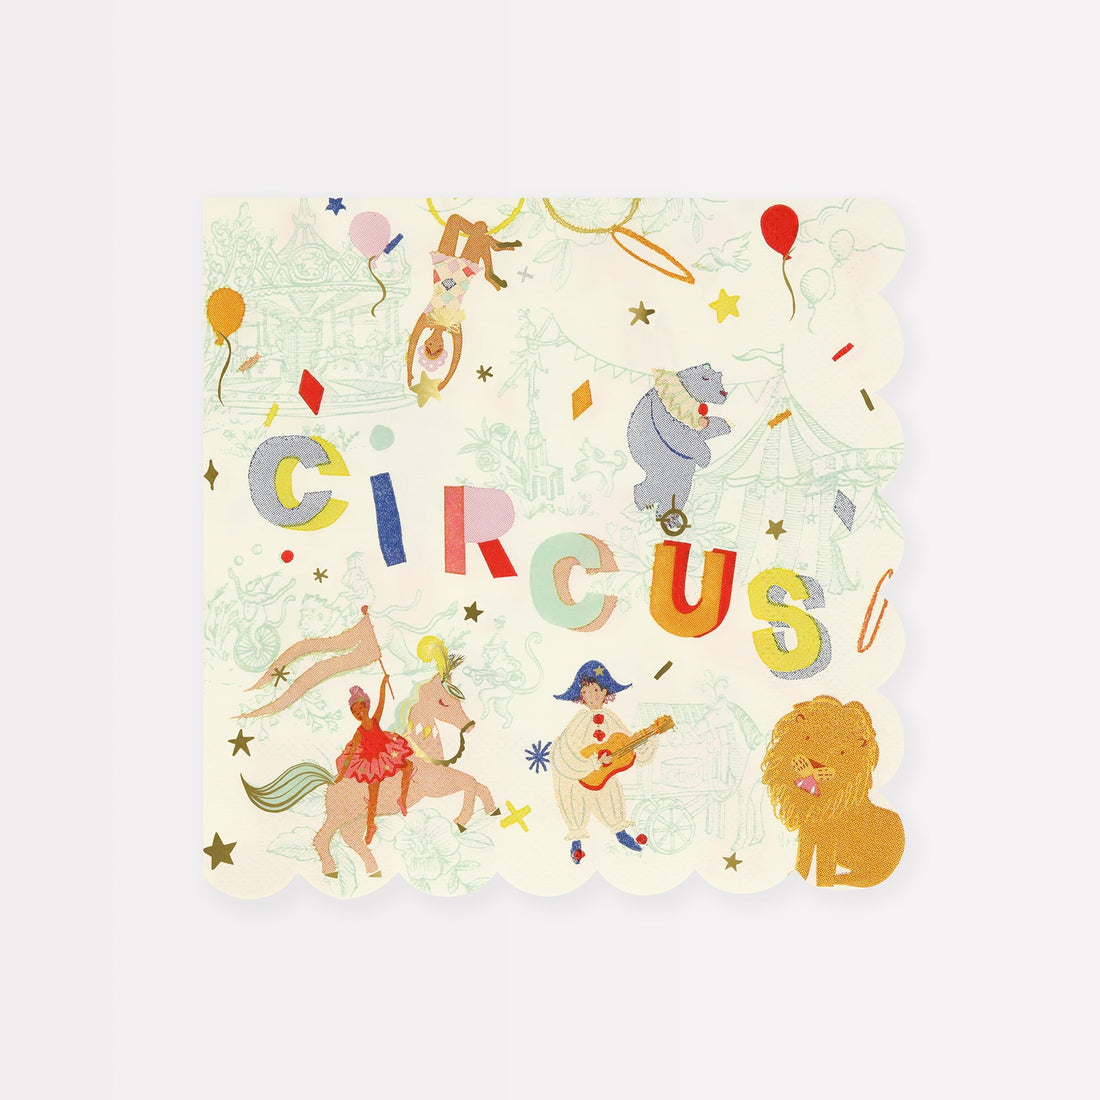 Colorful circus-themed illustration with whimsical animals performing various acts, set against a textured background on sustainable FSC paper - Meri Meri&